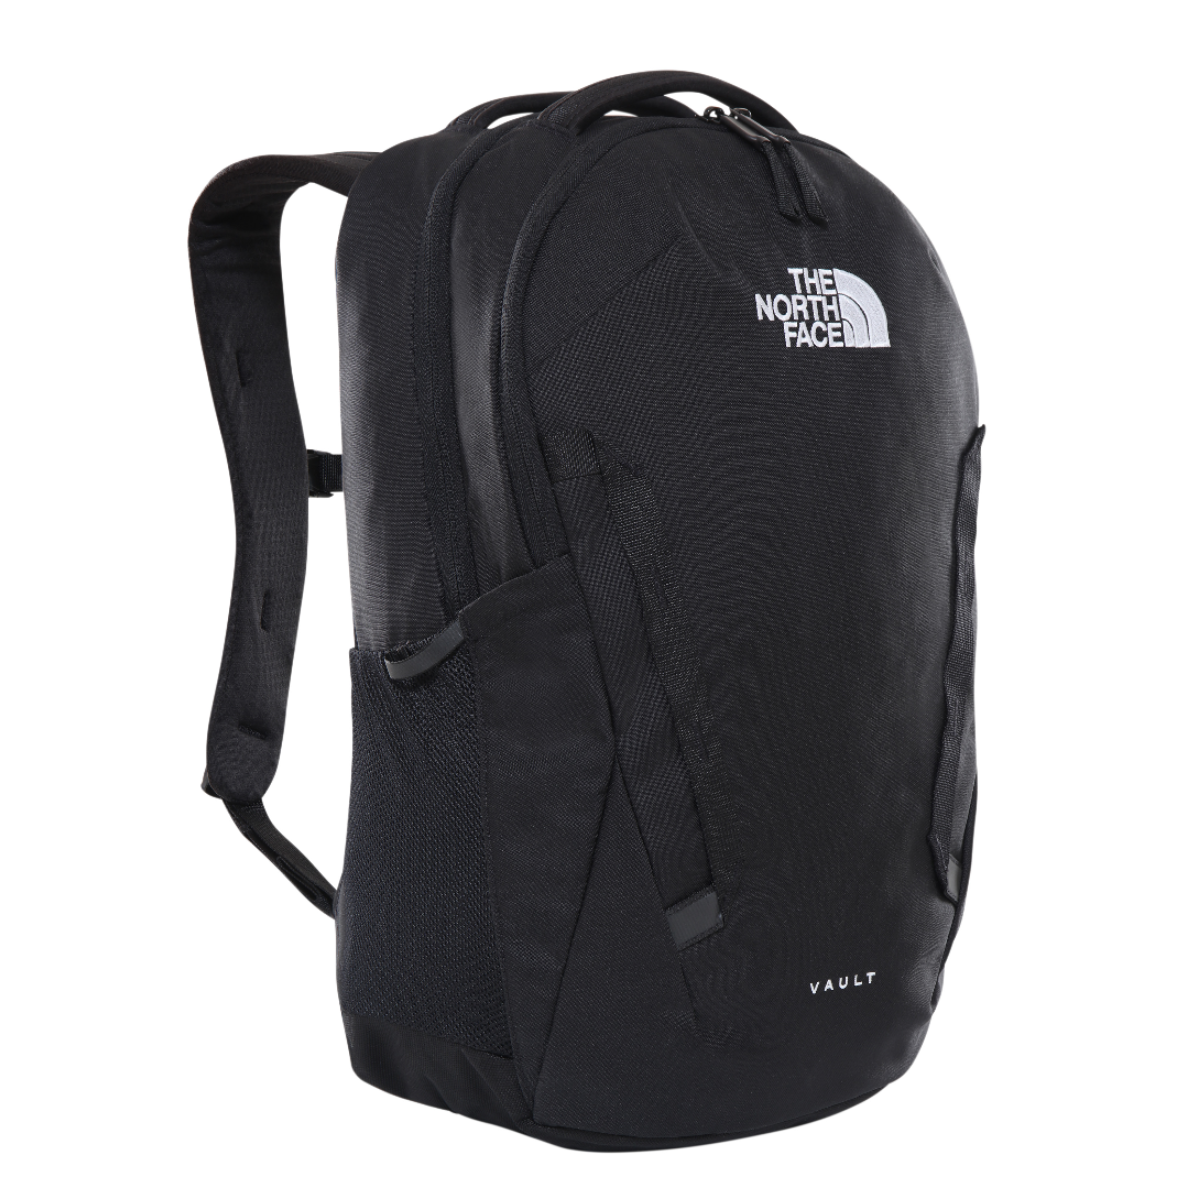 The North Face Vault Backpack | TNF Black